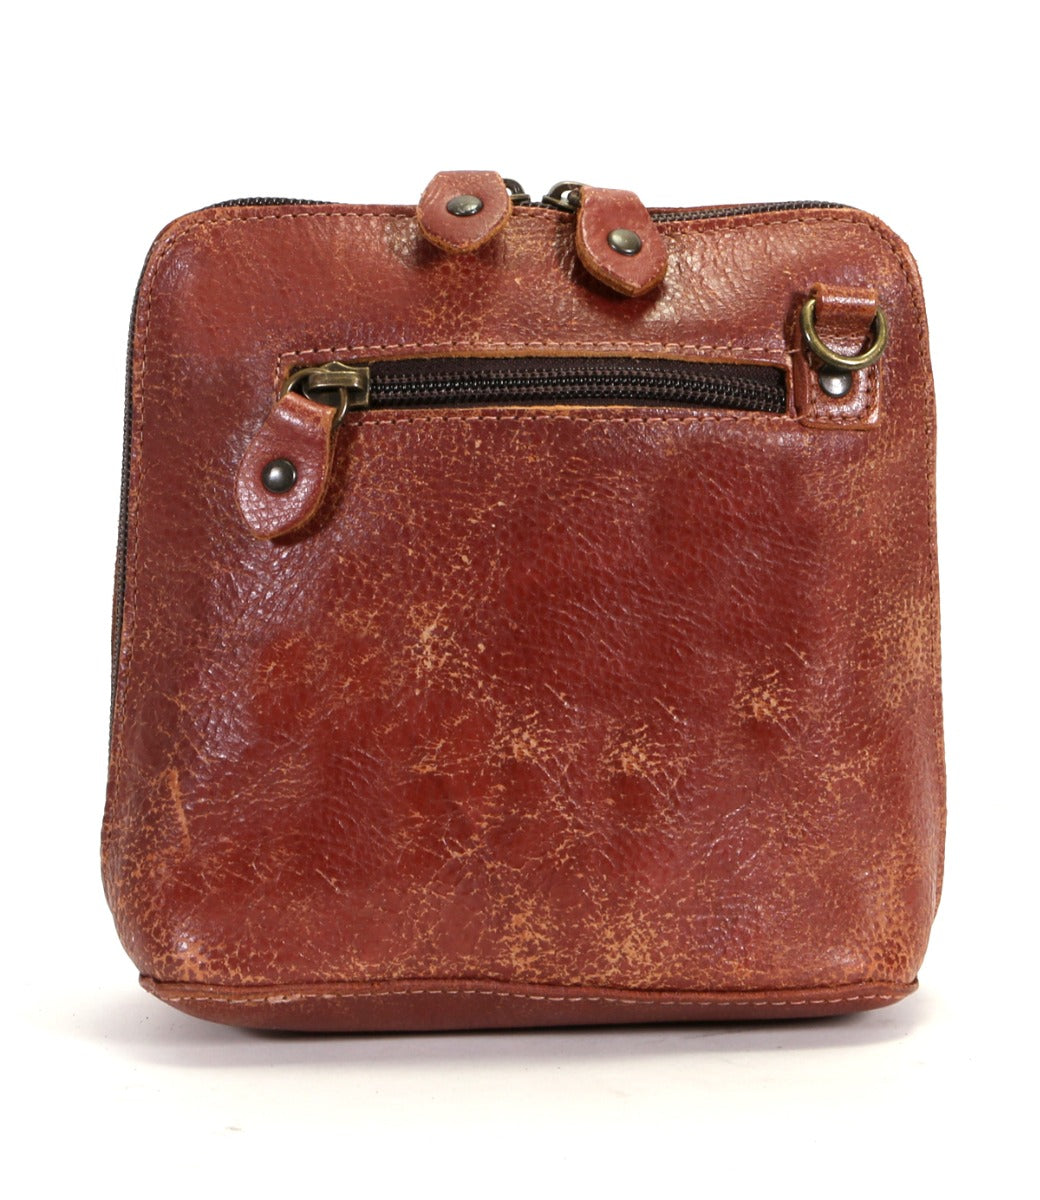 A brown leather Ventura cross body bag with a zipper by Bed Stu.